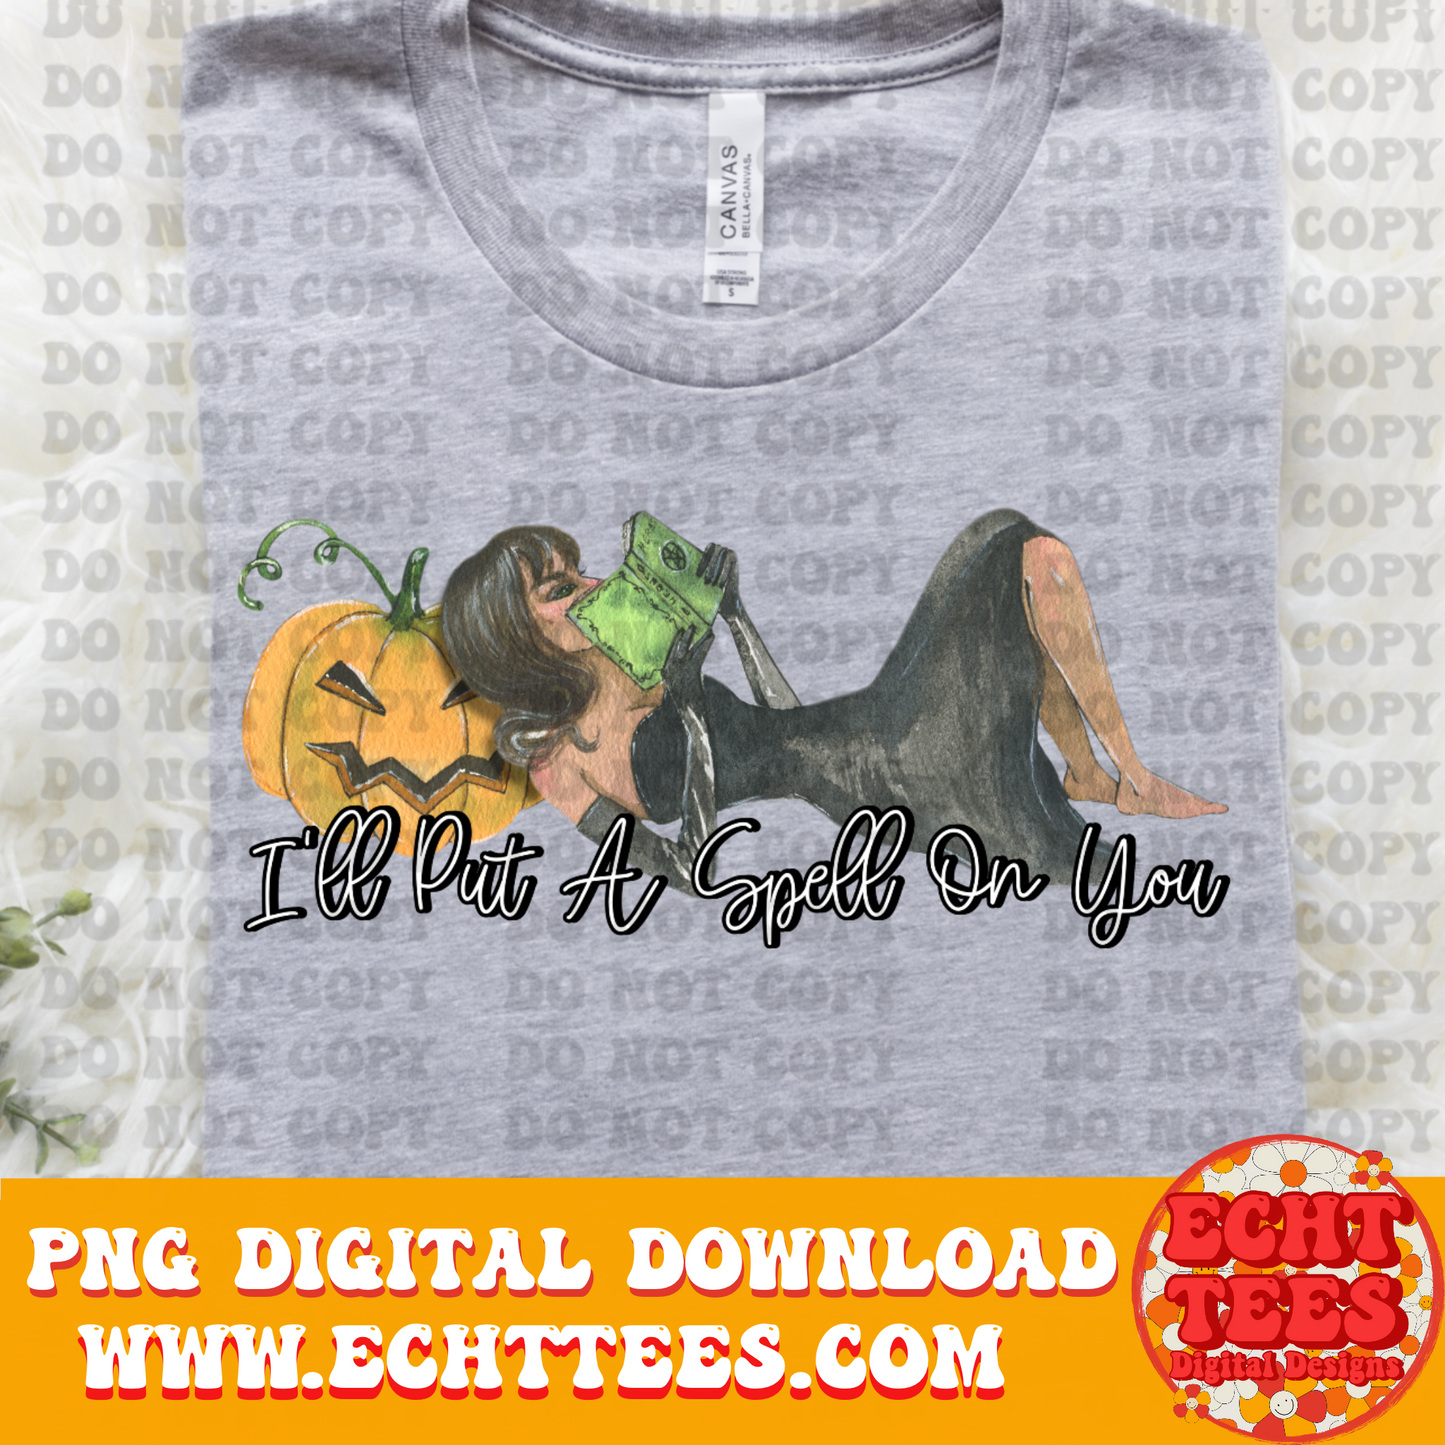 I’ll put a spell on you PNG Digital Download